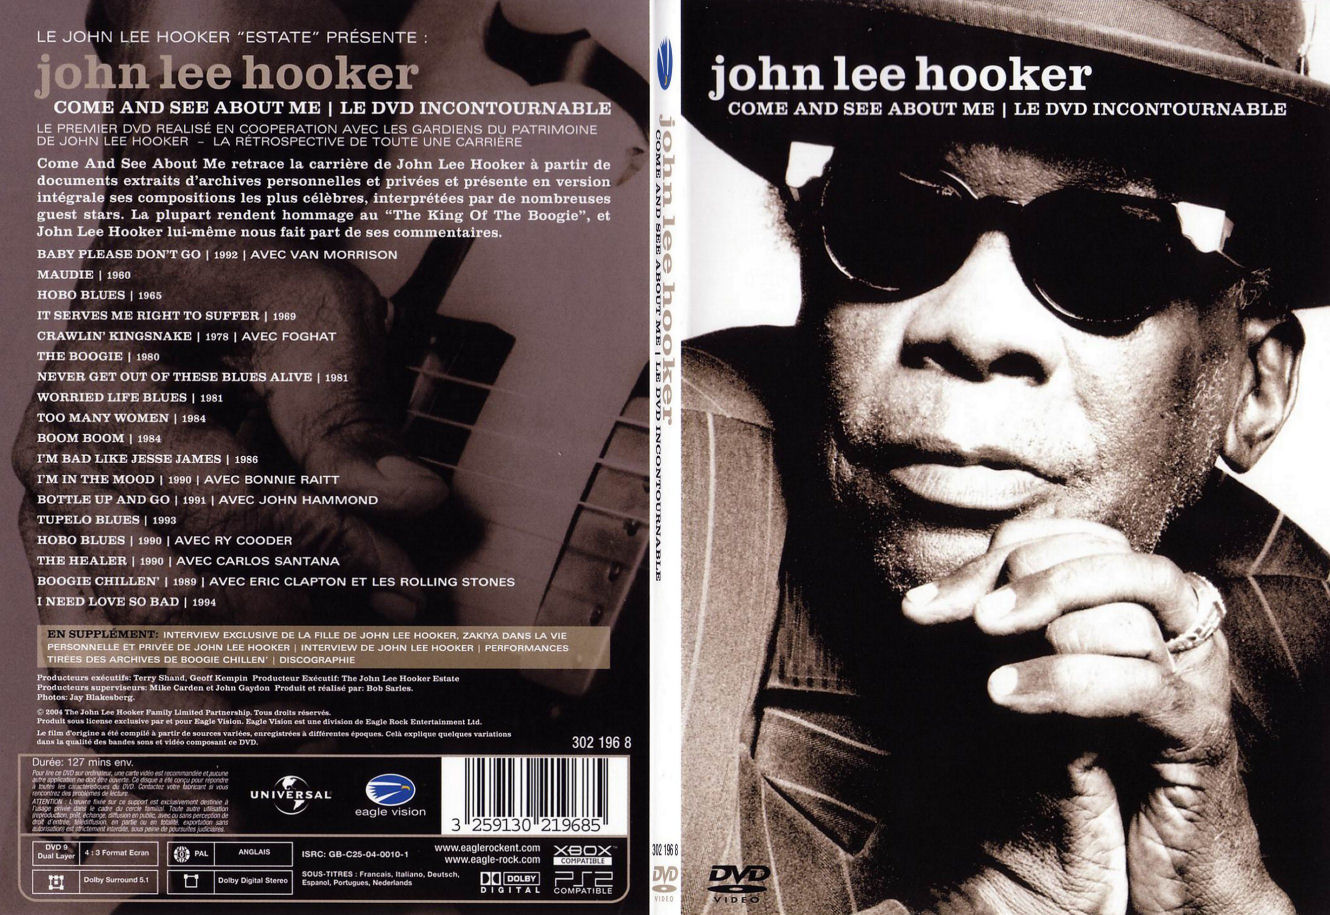 Jaquette DVD John Lee Hooker - Come and see about me - SLIM